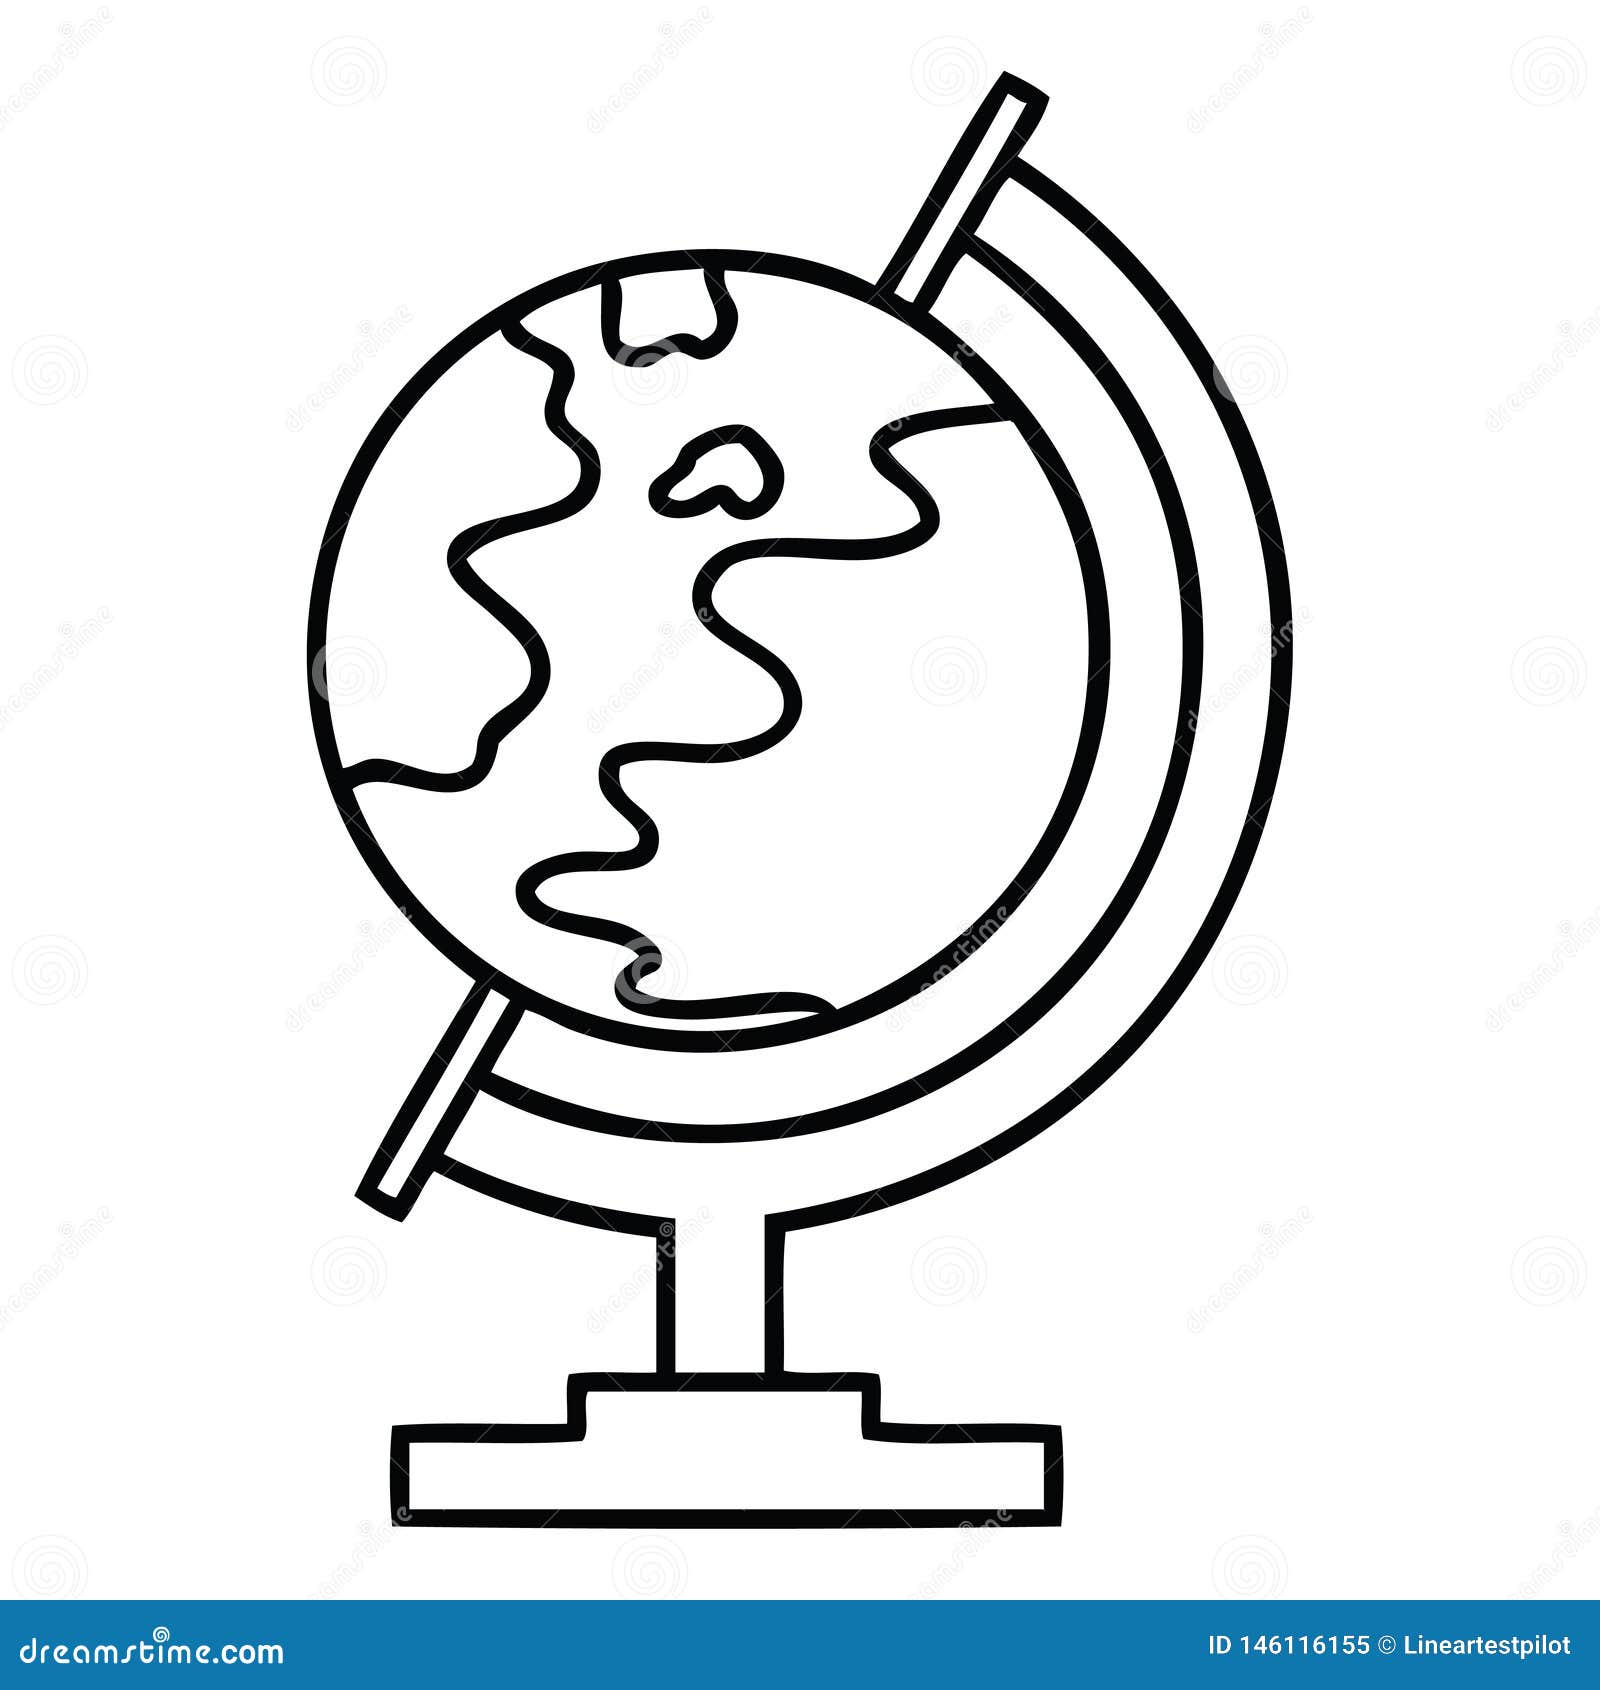 Line Drawing Cartoon of a World Globe Stock Vector - Illustration of  freehand, clip: 146116155